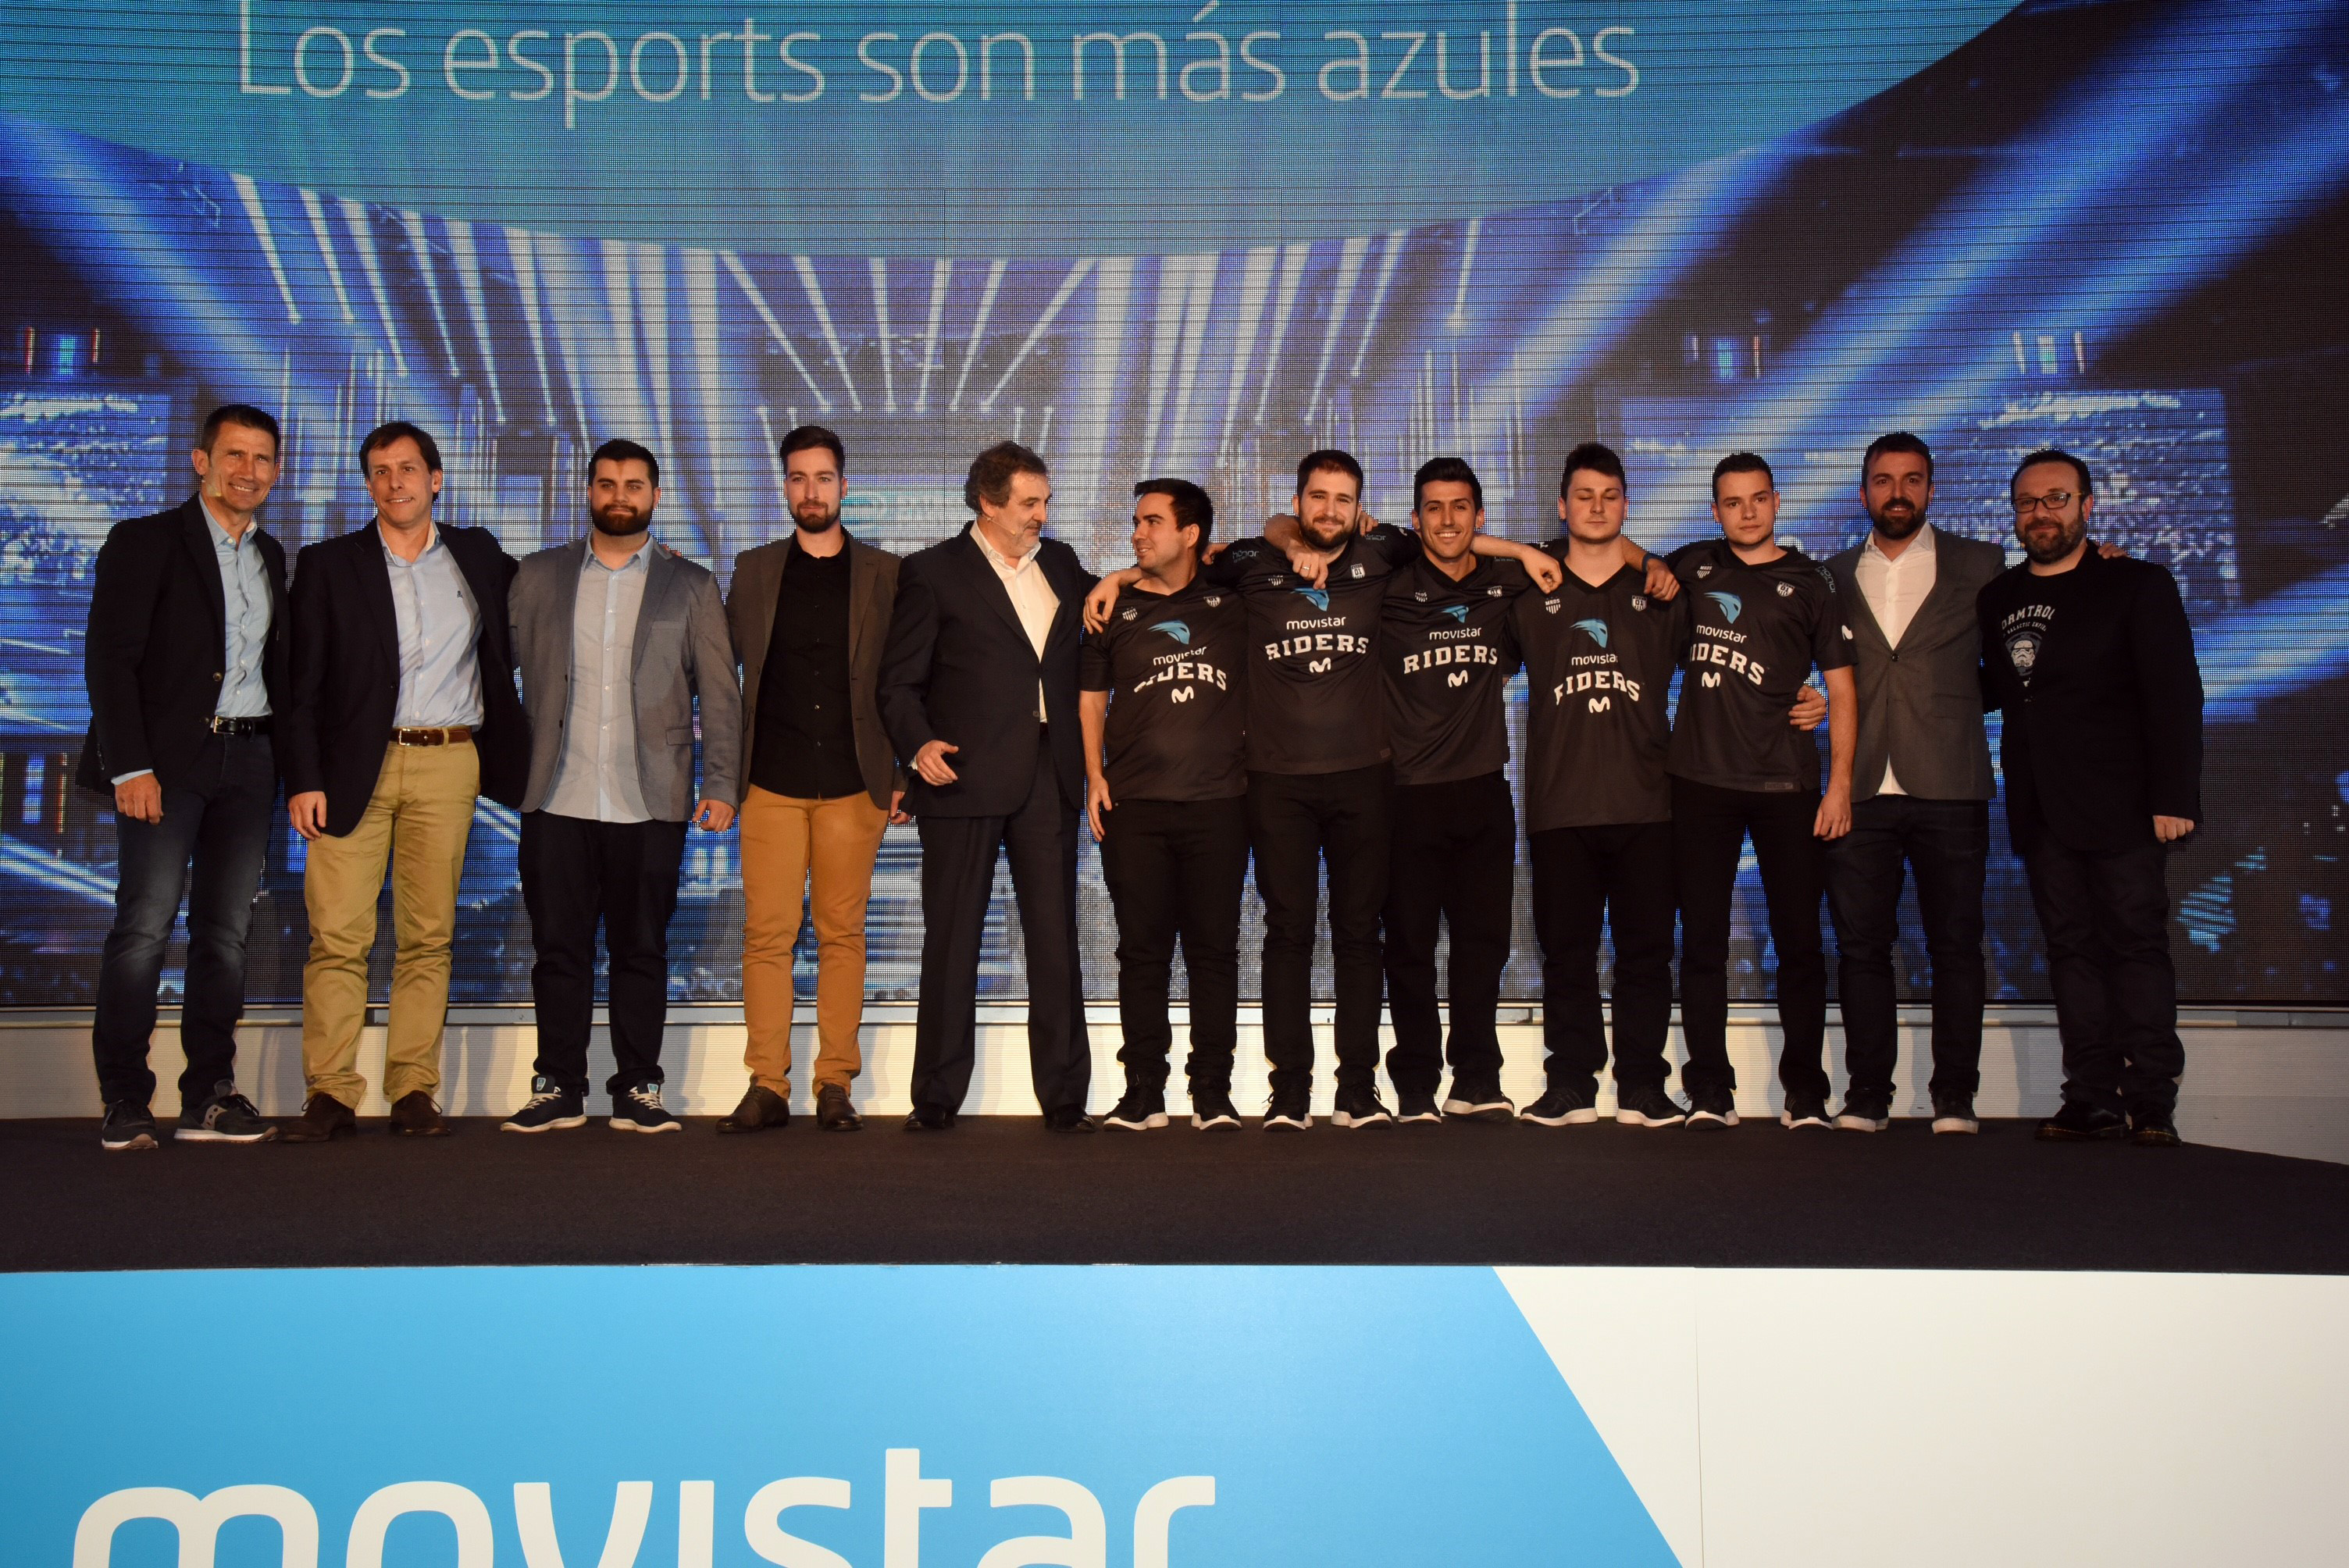 Movistar adds eSports to portfolio boosting its commitment to the world of sports and content